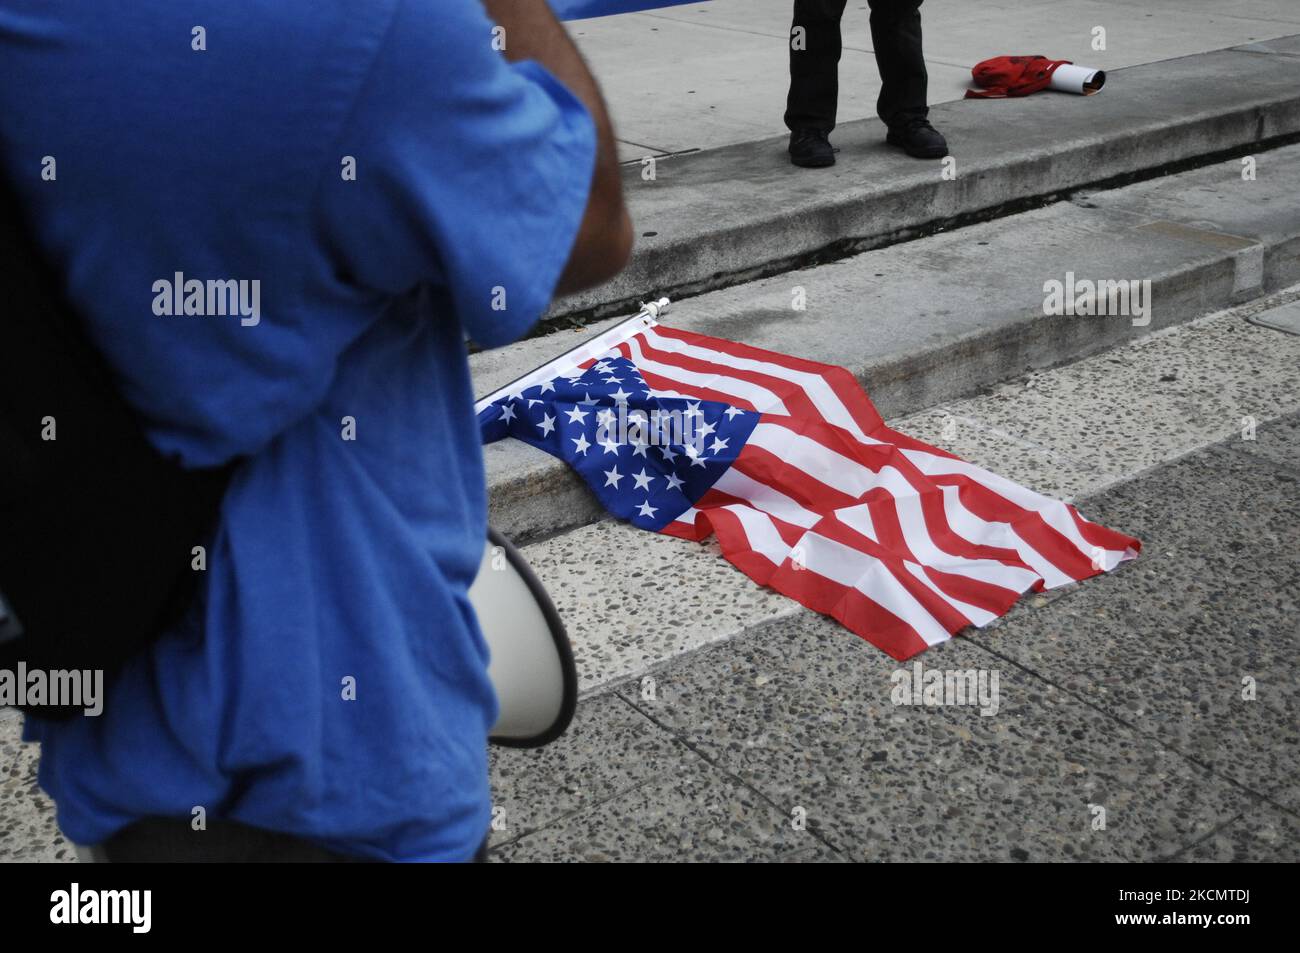 An upside-down American flag lays at the feet of activists as a former Occupier talks about systemic economic inequality, the need for electoral reforms, proportional representation, and the danger America faces moving forward if we don't make those changes during a rally in front of City Hall in Philadelphia, PA, on September 17, 2021. (Photo by Cory Clark/NurPhoto) Stock Photo